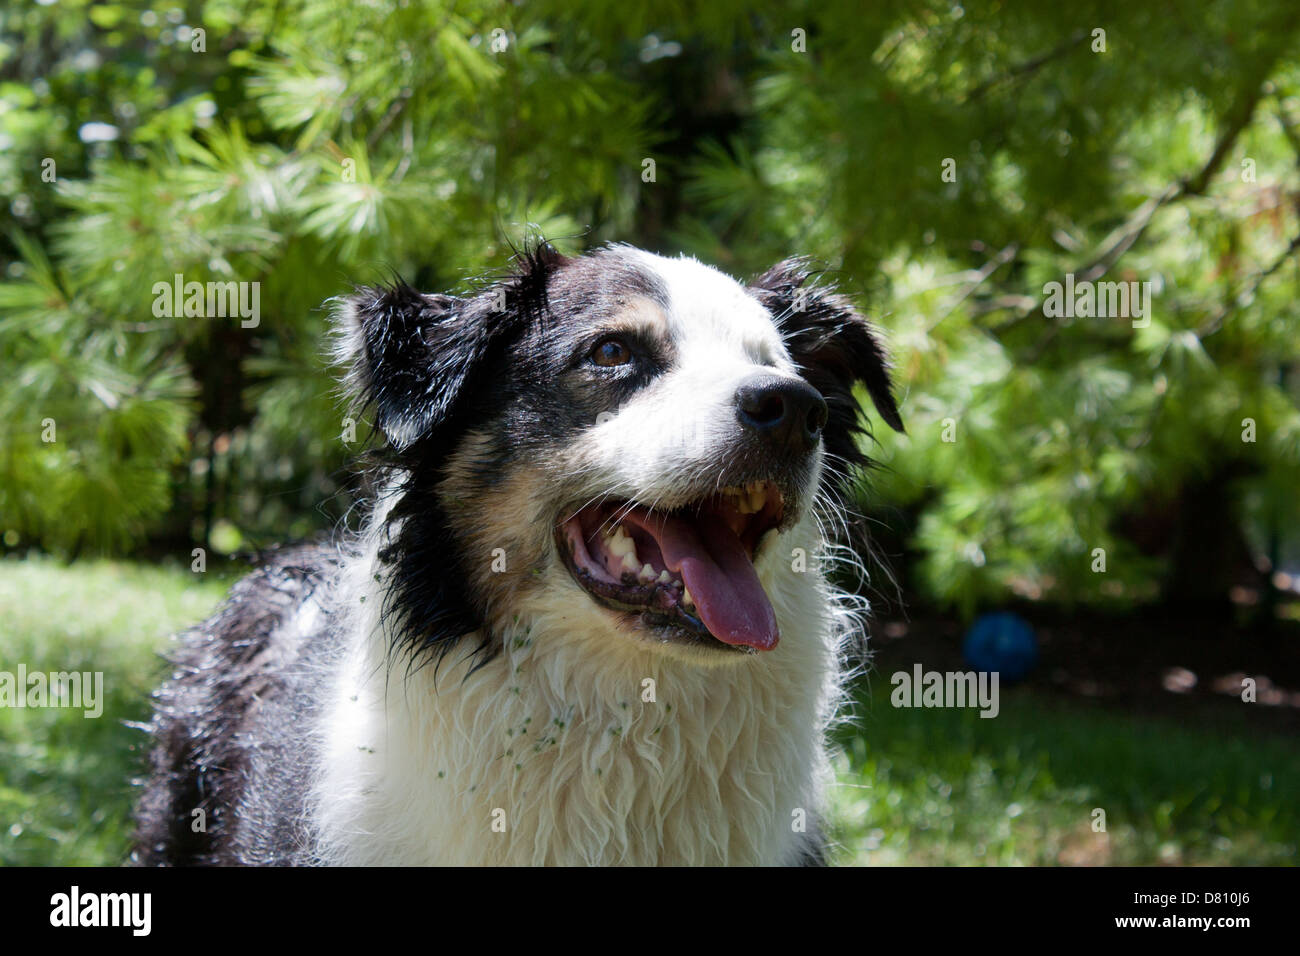 A Playful and happy Australian Shepherd dog wet and covered with burrs waits for someone to throw a ball Stock Photo